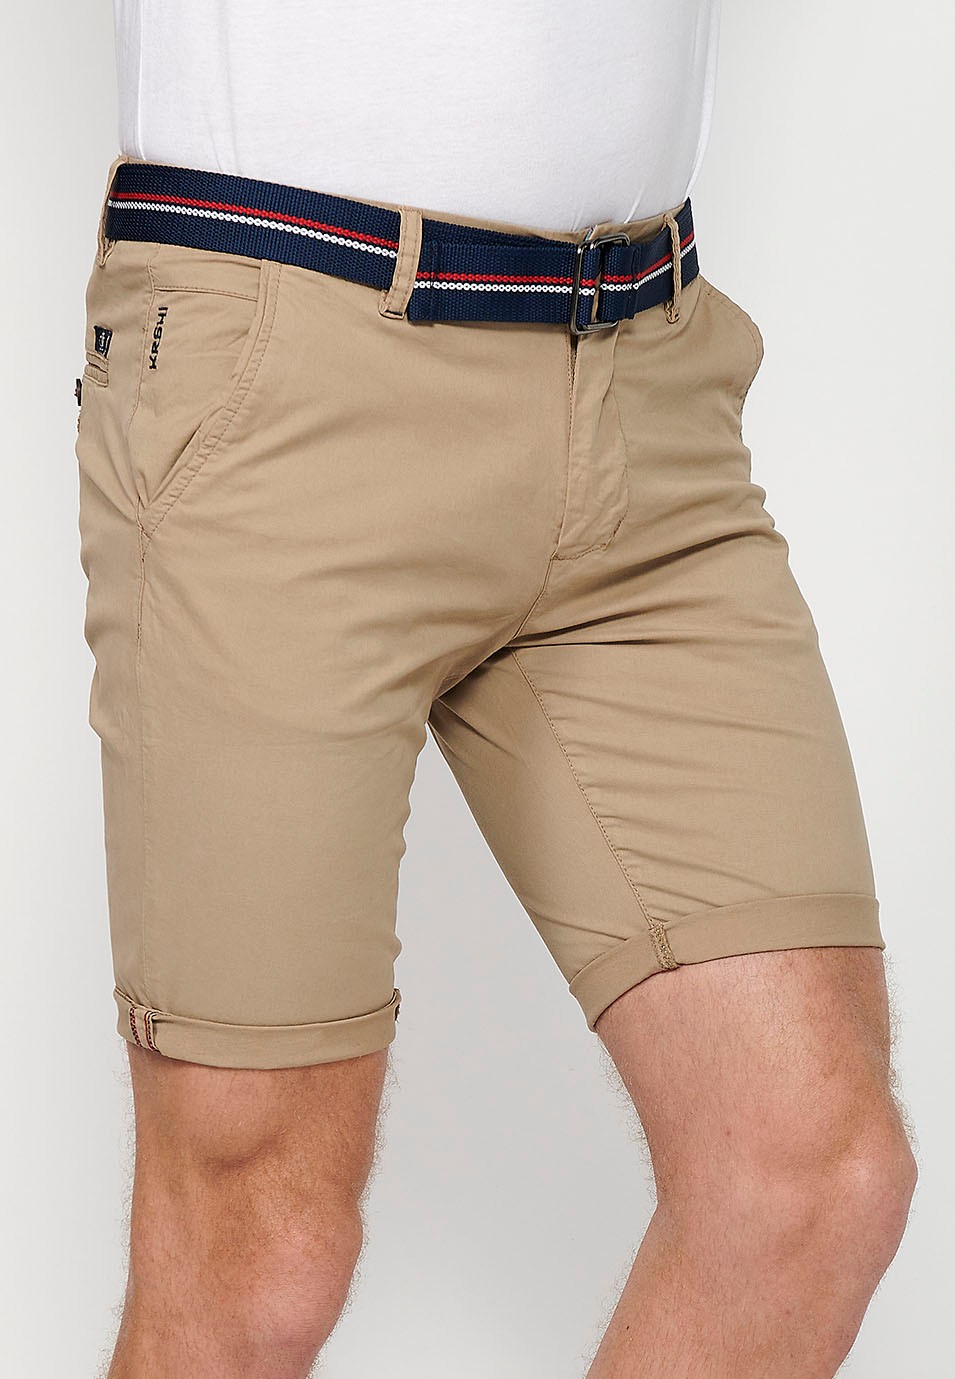 Shorts with a turn-up finish with front closure with zipper and button and belt in Beige Color for Men 3